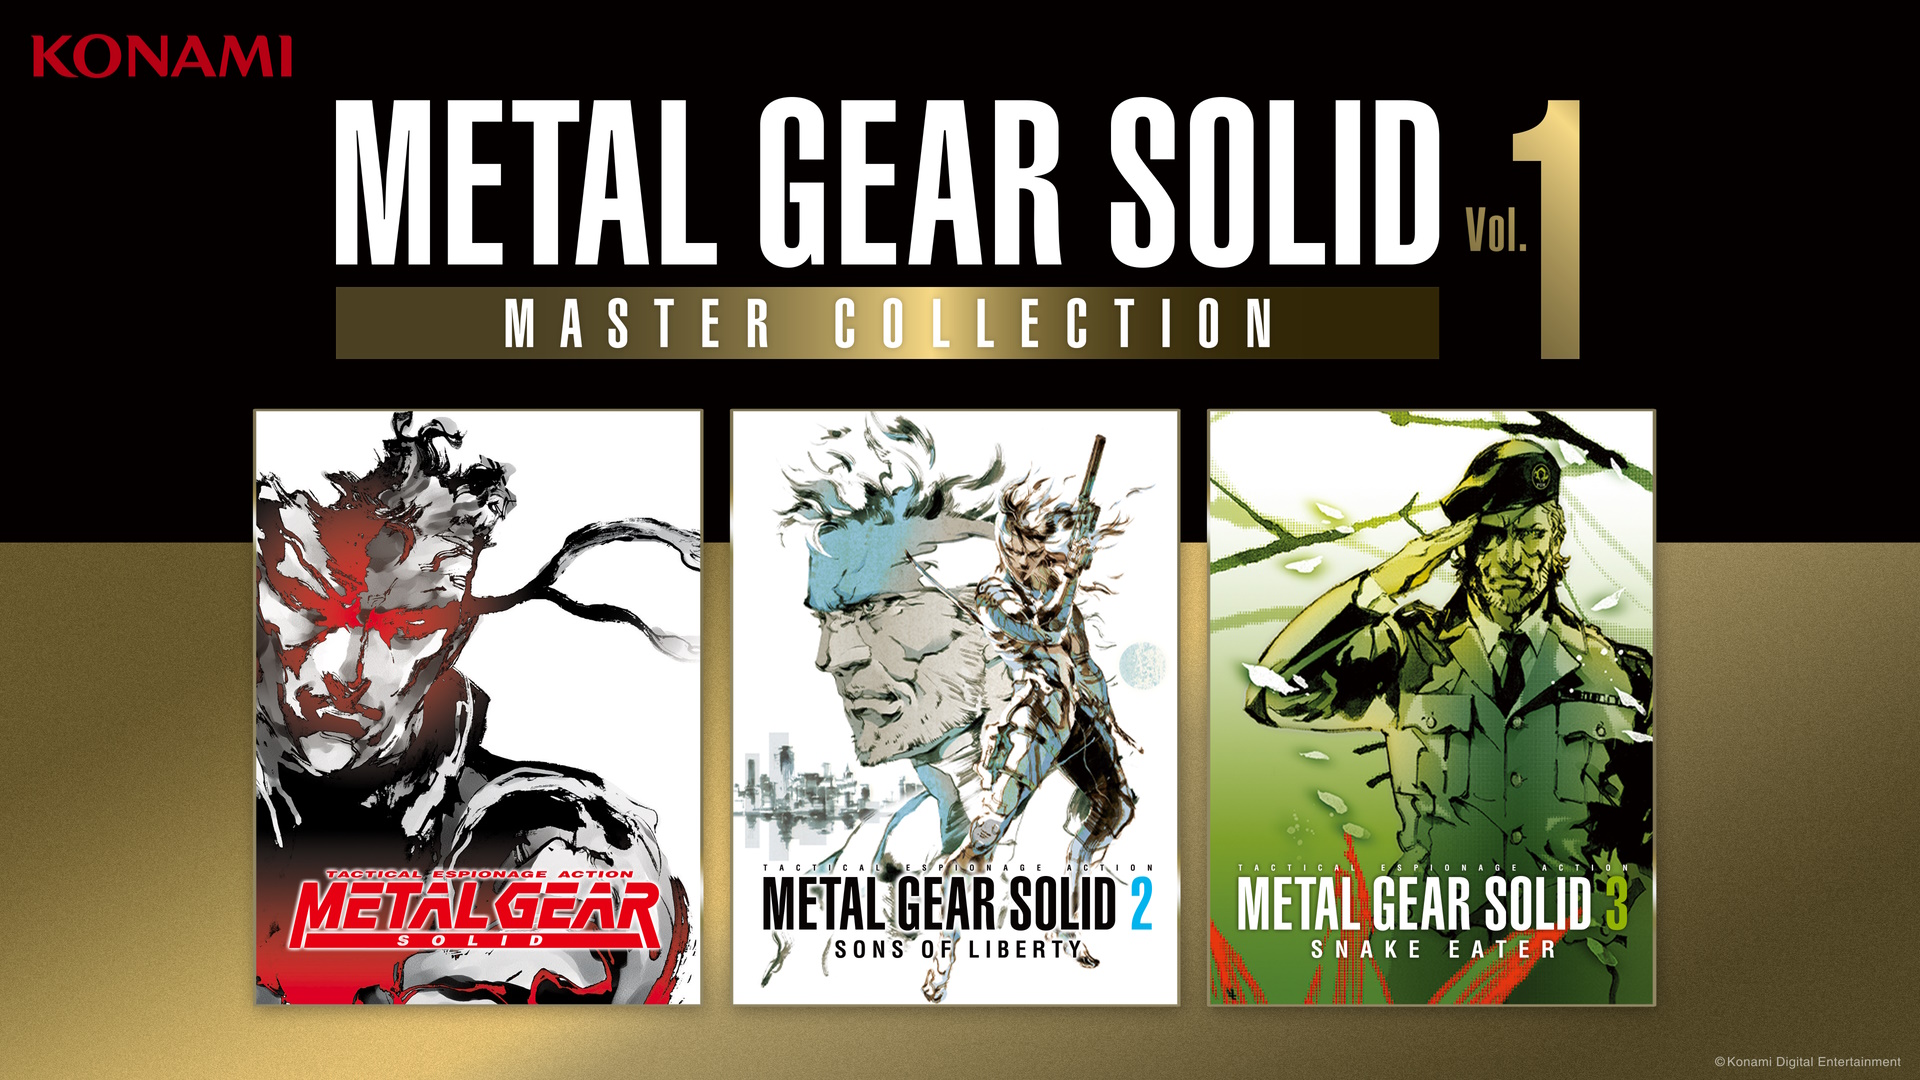 Hideo Kojima to discuss past, present, and future of 'Metal Gear